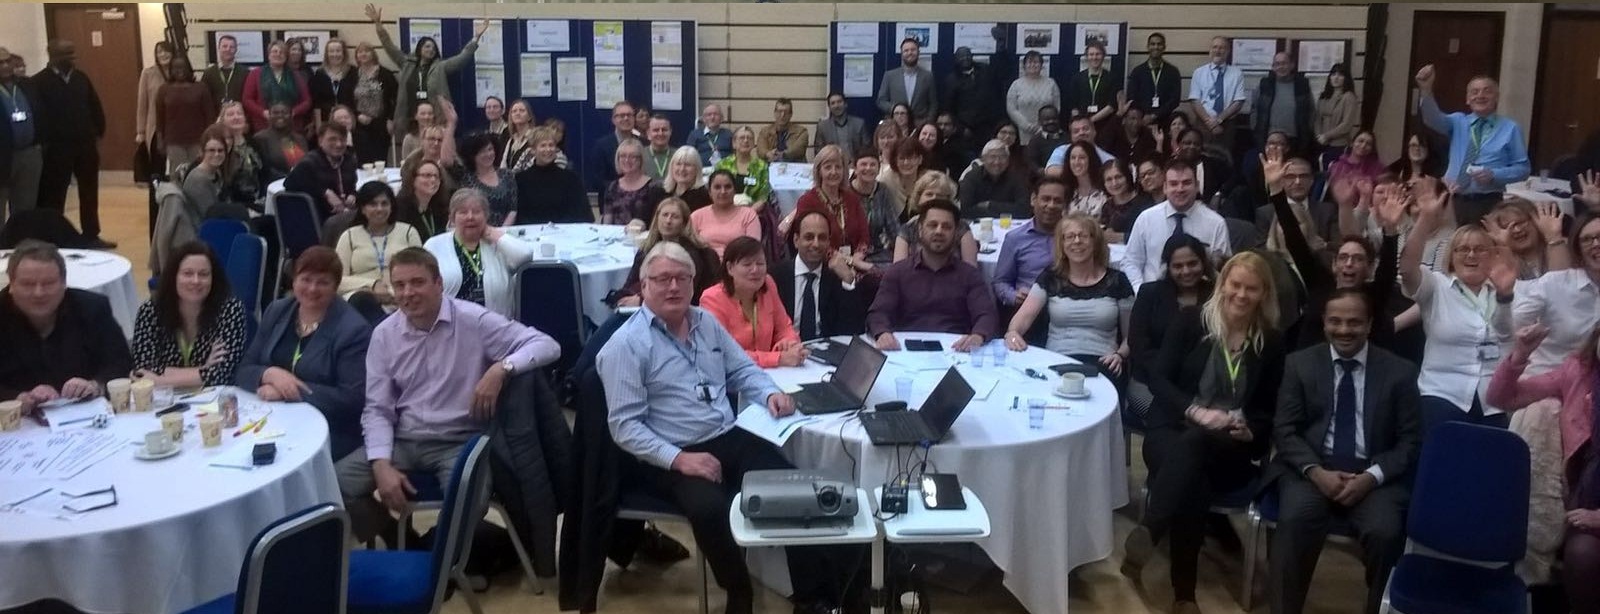 Bedfordshire and Luton conference photo - trimmed